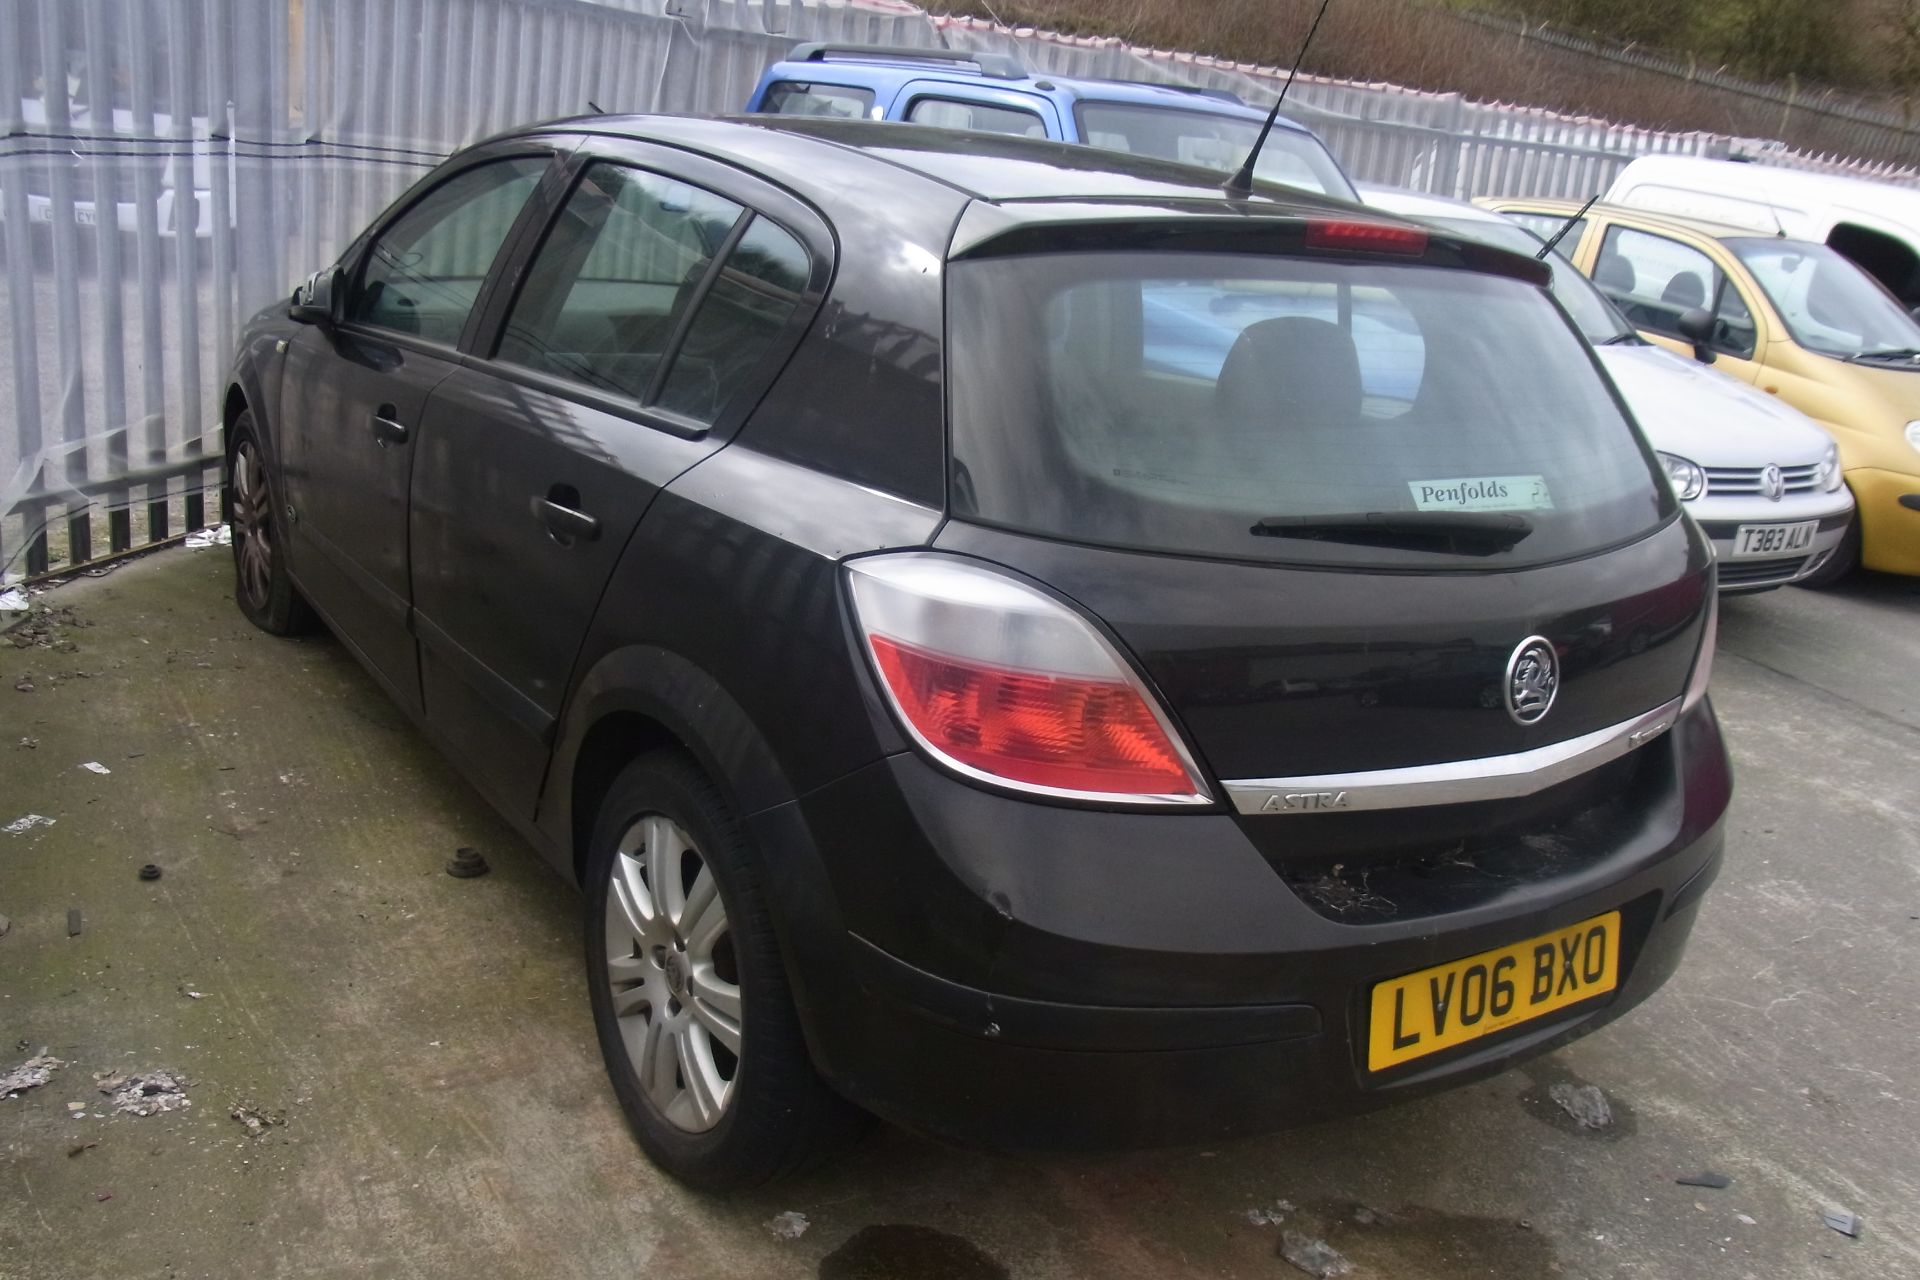 LV06 BXO - Vauxhall Astra Active - Image 2 of 3